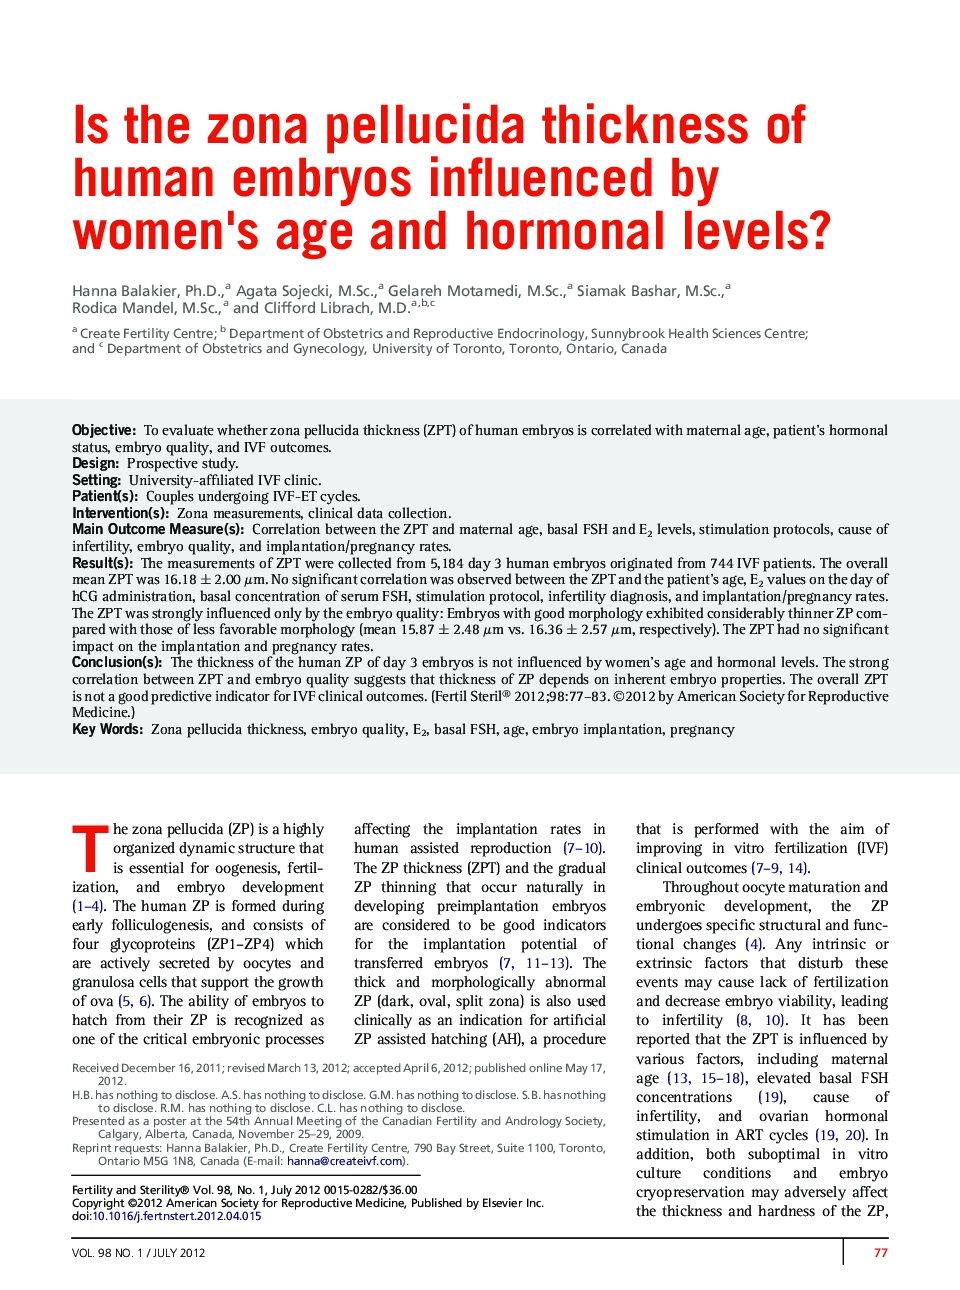 Is the zona pellucida thickness of human embryos influenced by women's age and hormonal levels? 